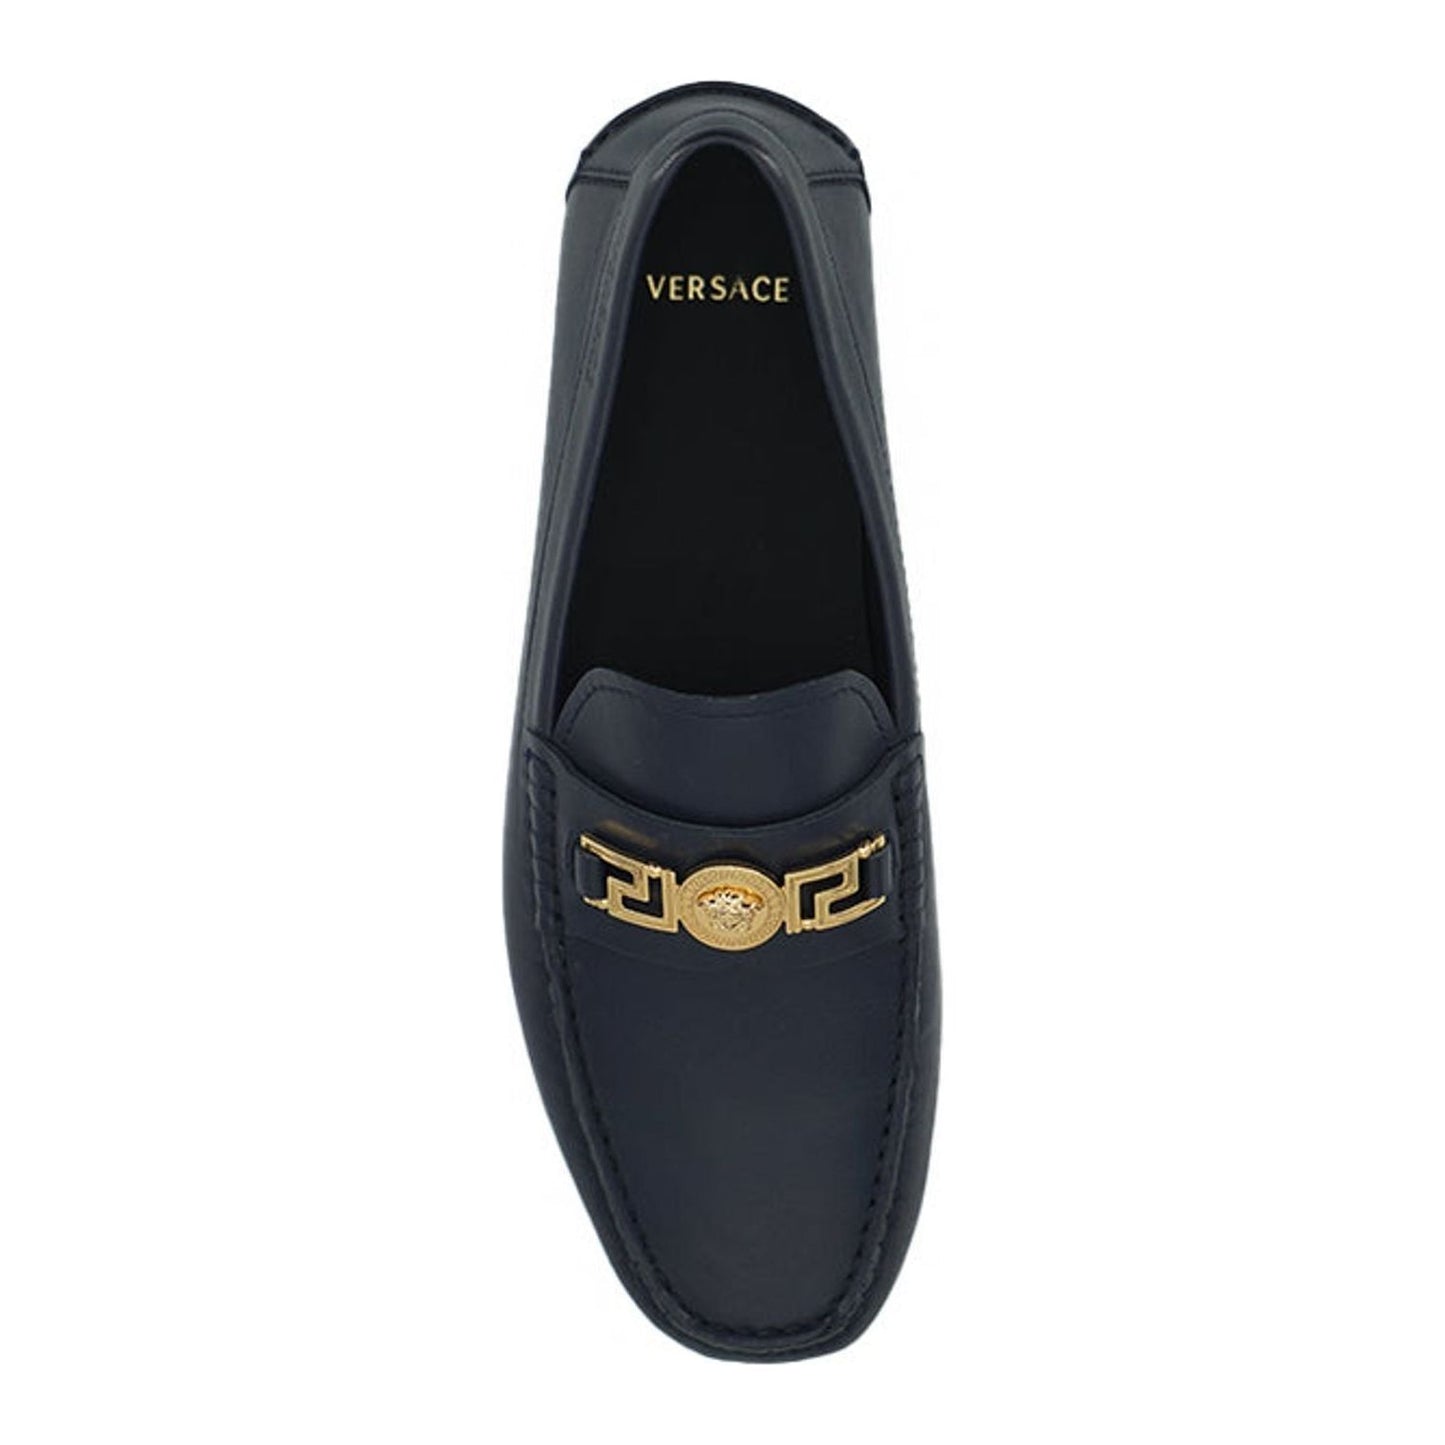 Versace | Navy Blue Calf Leather Loafers Shoes  | McRichard Designer Brands